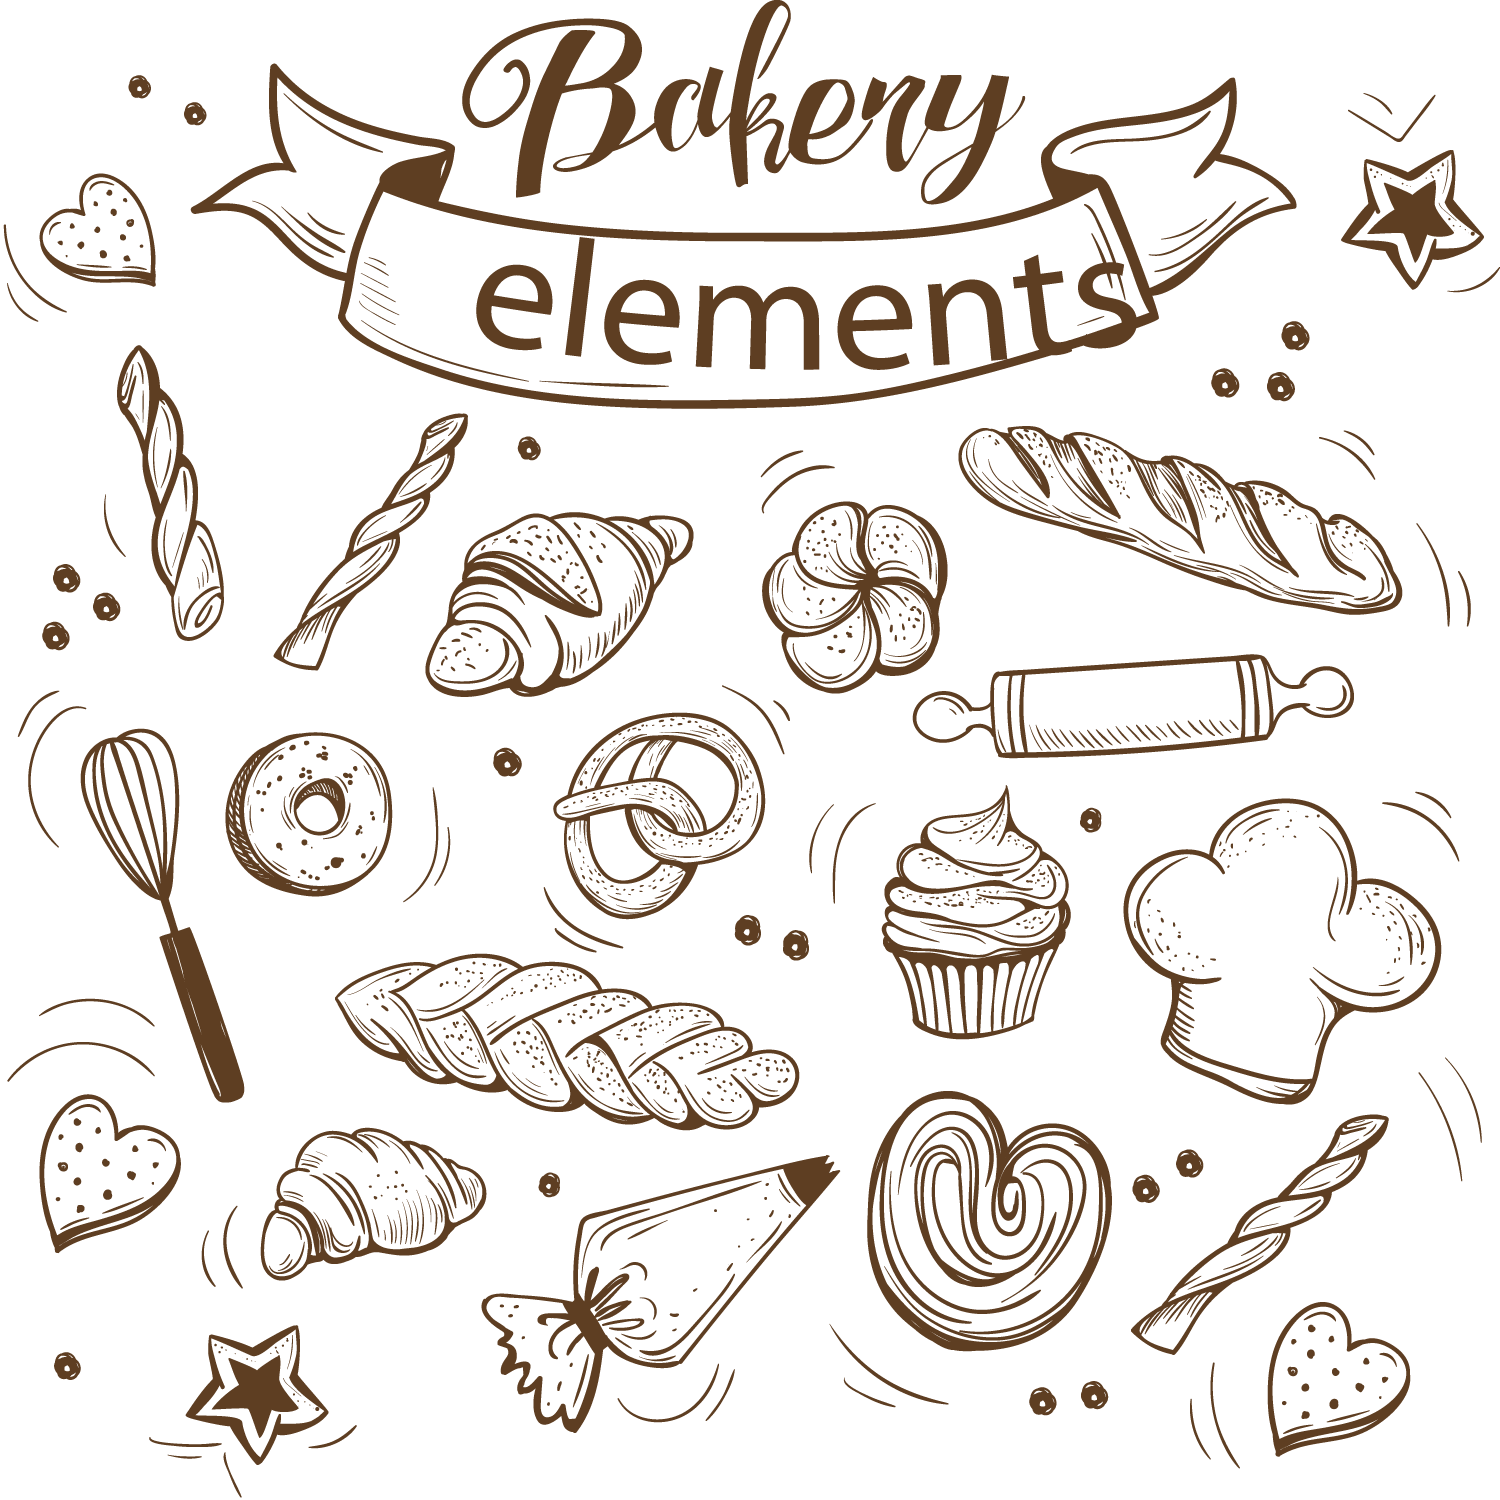 How To Draw A Bakery